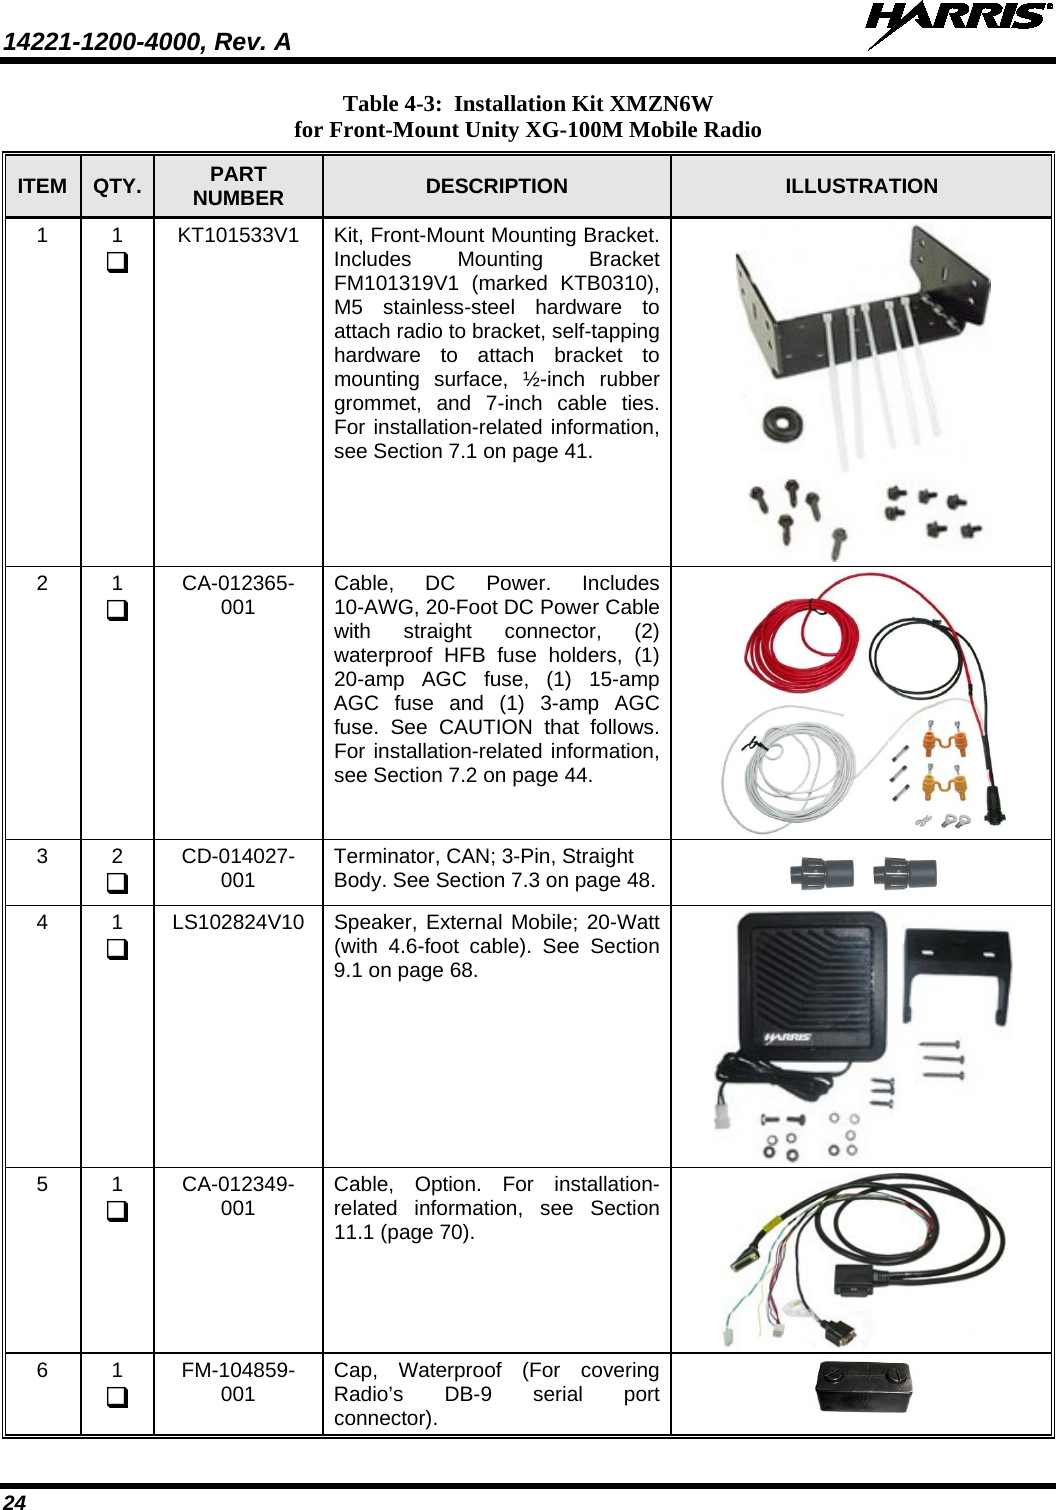 14221-1200-4000, Rev. A    24 Table 4-3:  Installation Kit XMZN6W for Front-Mount Unity XG-100M Mobile Radio ITEM QTY. PART NUMBER DESCRIPTION  ILLUSTRATION 1  1  KT101533V1 Kit, Front-Mount Mounting Bracket. Includes Mounting Bracket FM101319V1 (marked KTB0310), M5 stainless-steel hardware to attach radio to bracket, self-tapping hardware to attach bracket to mounting surface, ½-inch rubber grommet, and 7-inch cable ties. For installation-related information, see Section 7.1 on page 41.  2  1  CA-012365-001 Cable, DC Power. Includes 10-AWG, 20-Foot DC Power Cable with straight connector, (2) waterproof HFB fuse holders, (1) 20-amp AGC fuse,  (1) 15-amp AGC fuse and (1) 3-amp AGC fuse. See CAUTION that follows. For installation-related information, see Section 7.2 on page 44.  3  2  CD-014027-001 Terminator, CAN; 3-Pin, Straight Body. See Section 7.3 on page 48.       4  1  LS102824V10 Speaker, External Mobile; 20-Watt (with 4.6-foot cable).  See Section 9.1 on page 68.  5  1  CA-012349-001 Cable, Option. For installation-related information, see Section 11.1 (page 70).  6  1  FM-104859-001 Cap, Waterproof (For covering Radio’s DB-9 serial port connector).    